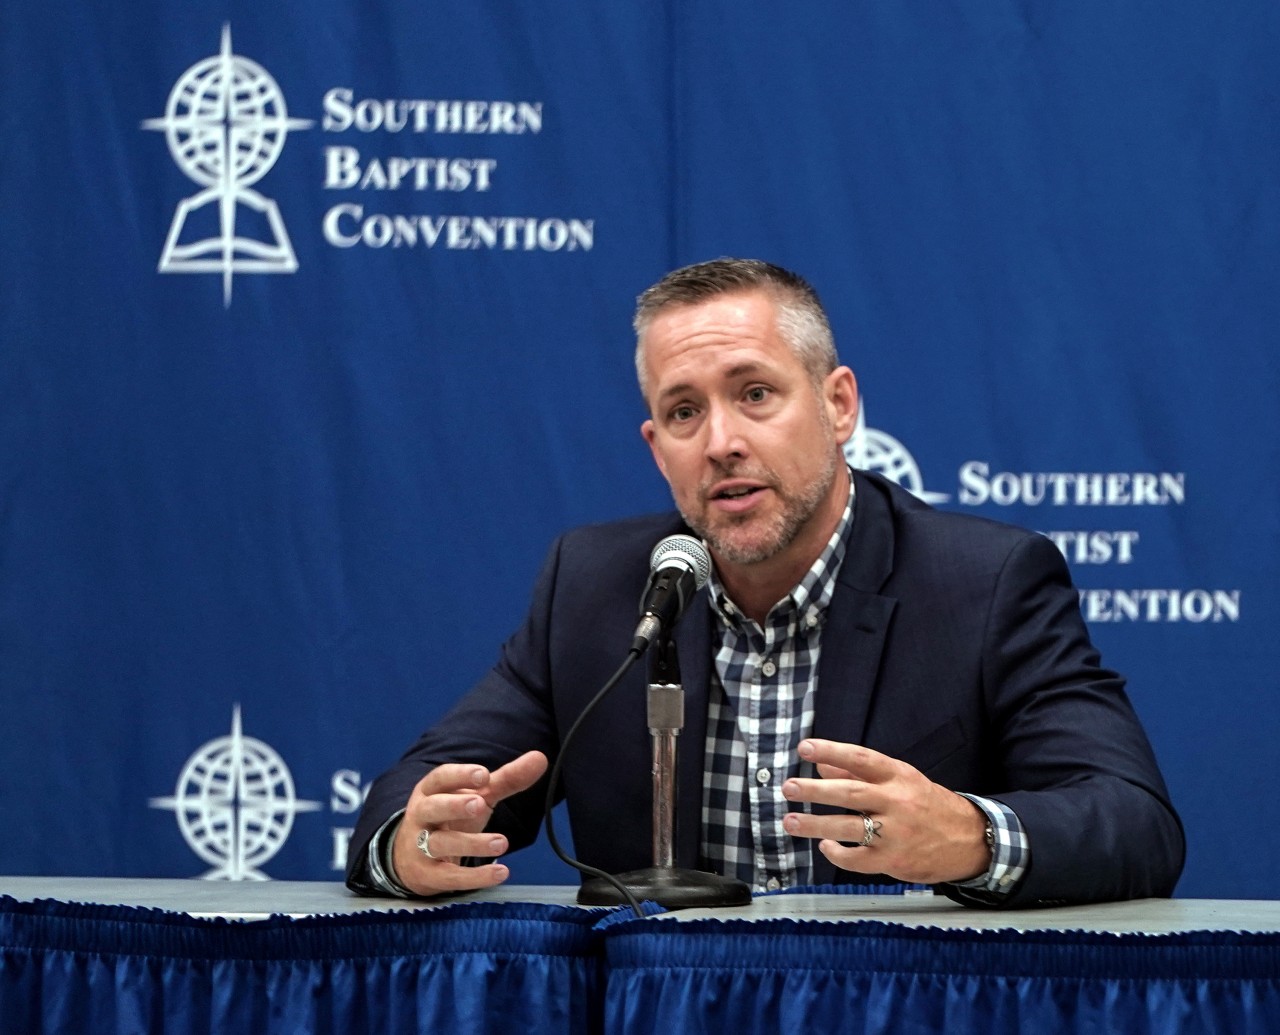 SBC leader introduces plan of action in wake of sexual abuse crisis